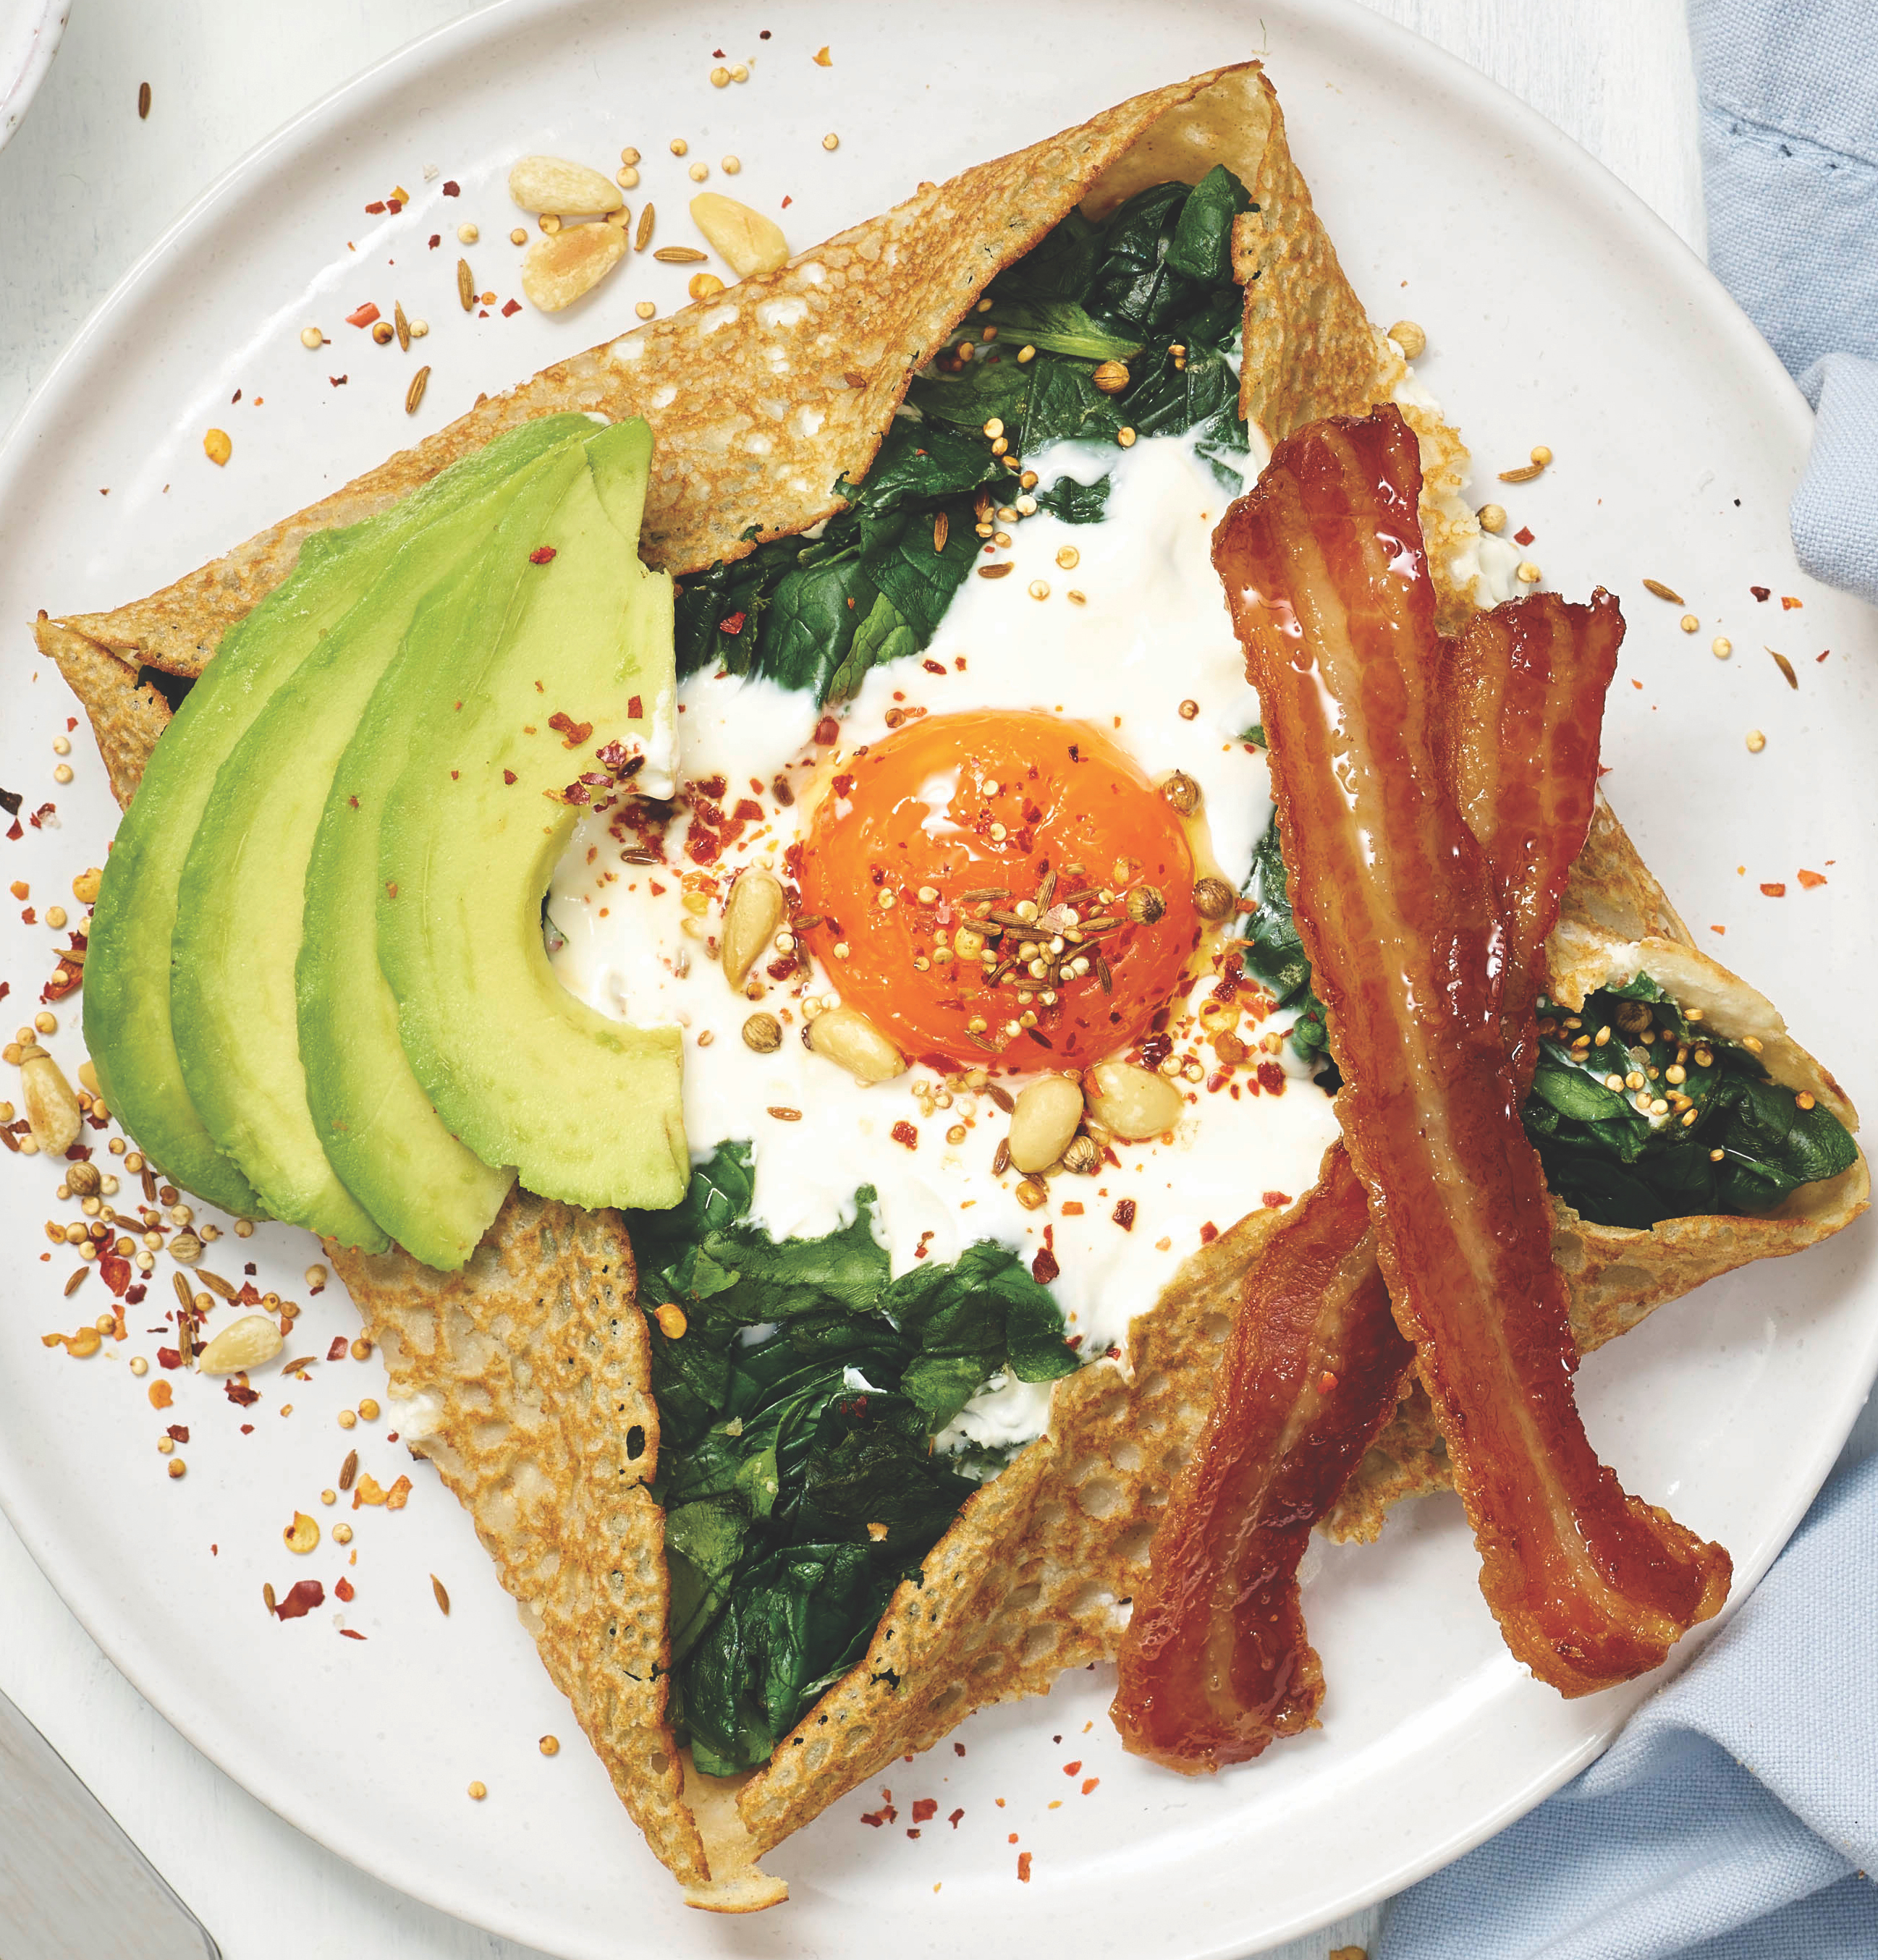 Egg & spinach galettes